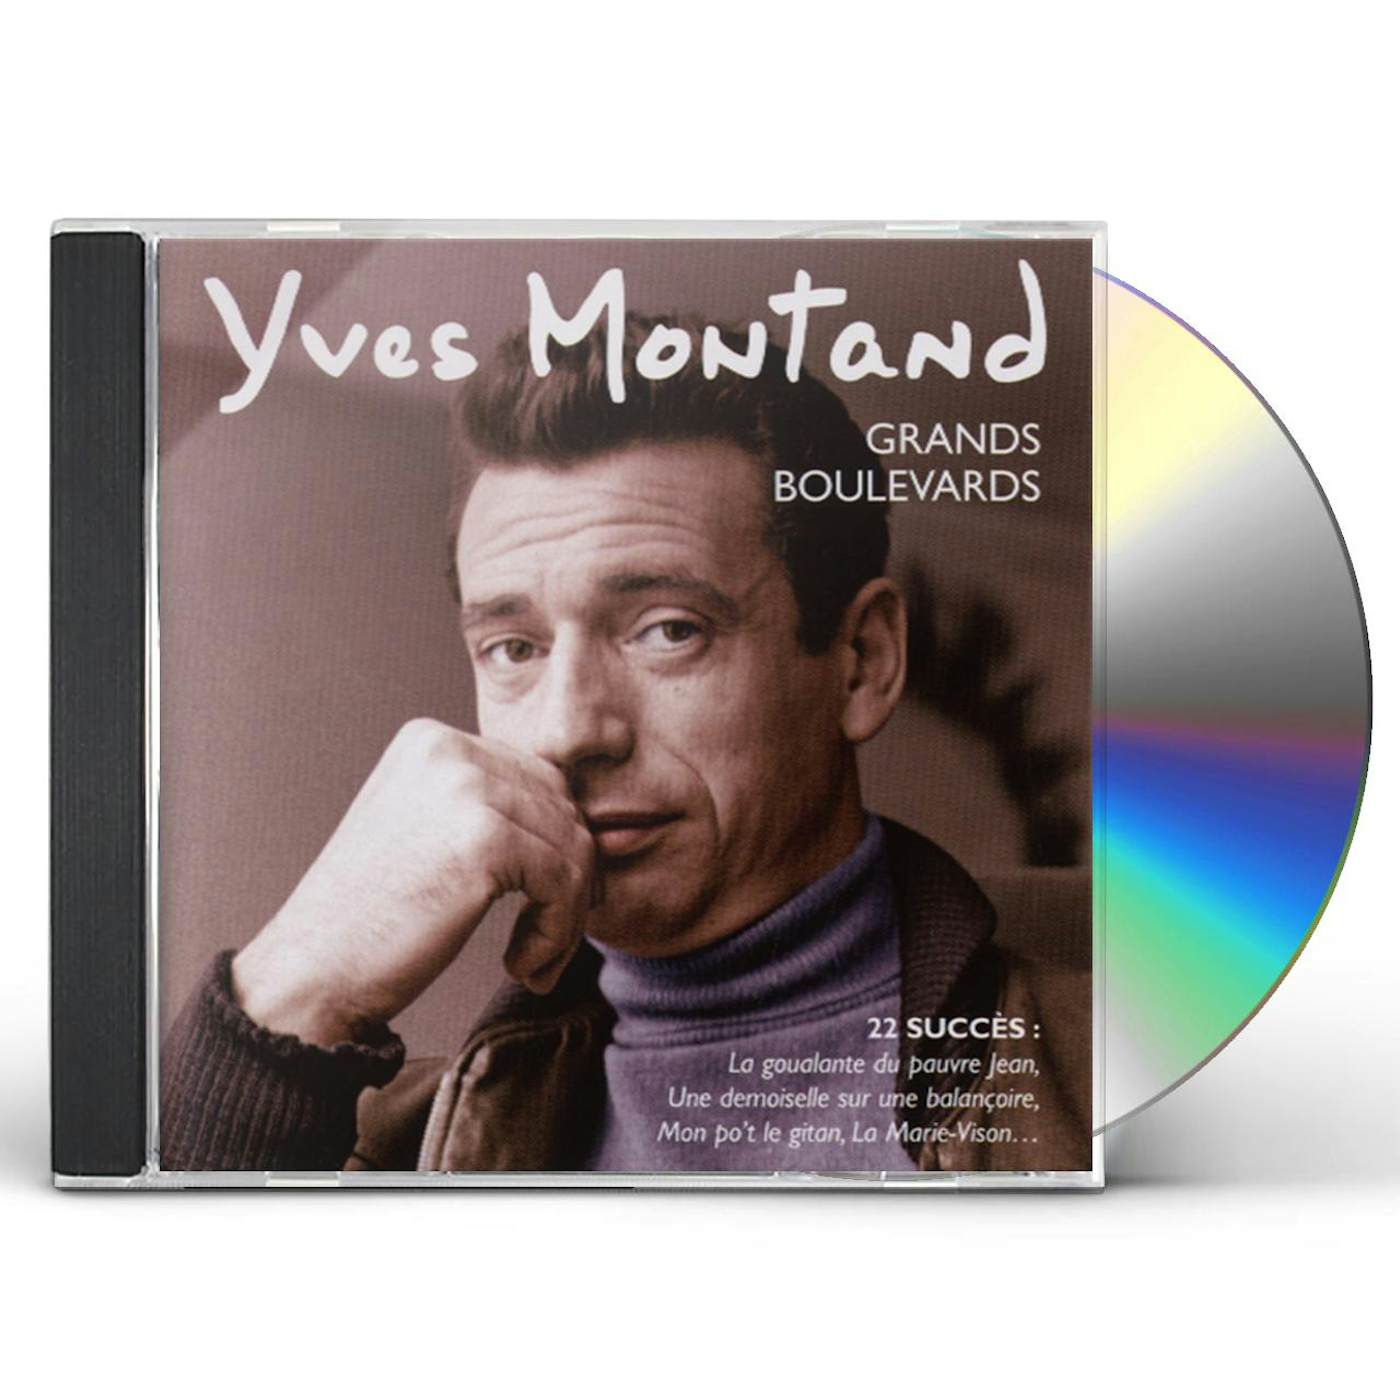 Yves Montand GRANDS BOULEVARDS CD